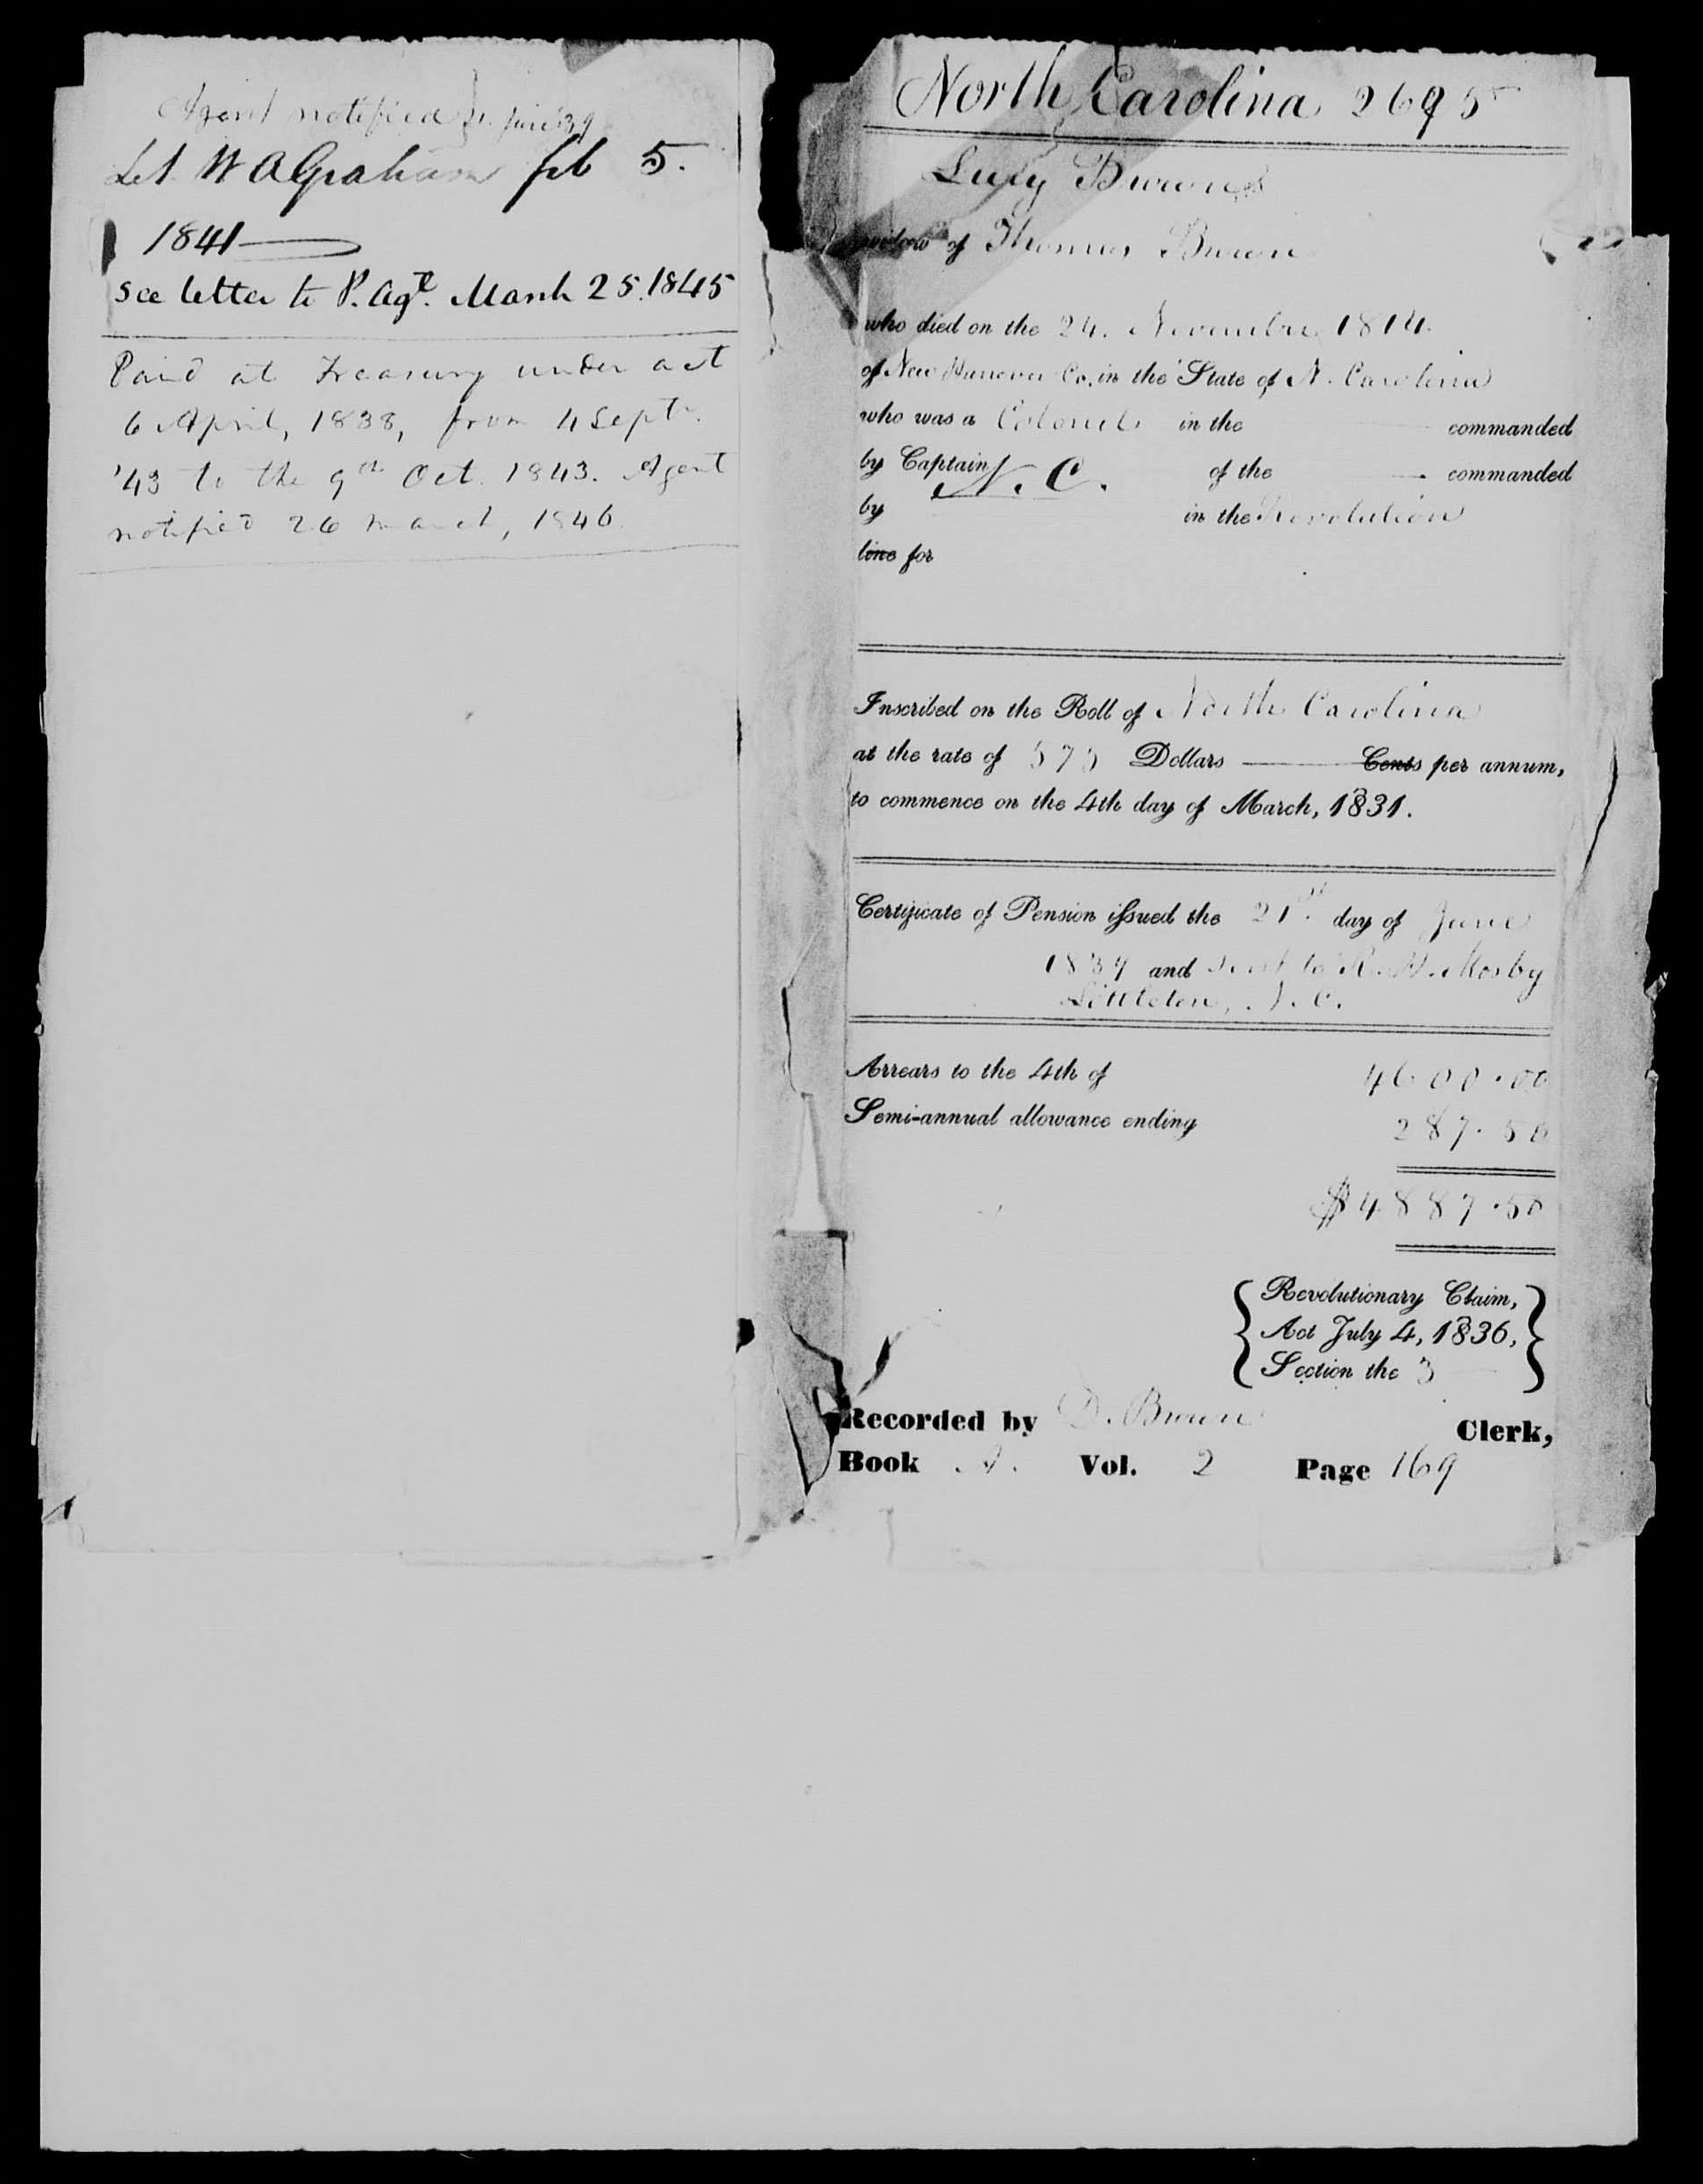 Docket for Widow's Pension from the U.S. Pension Office for Lucy Brown, 21 June 1839